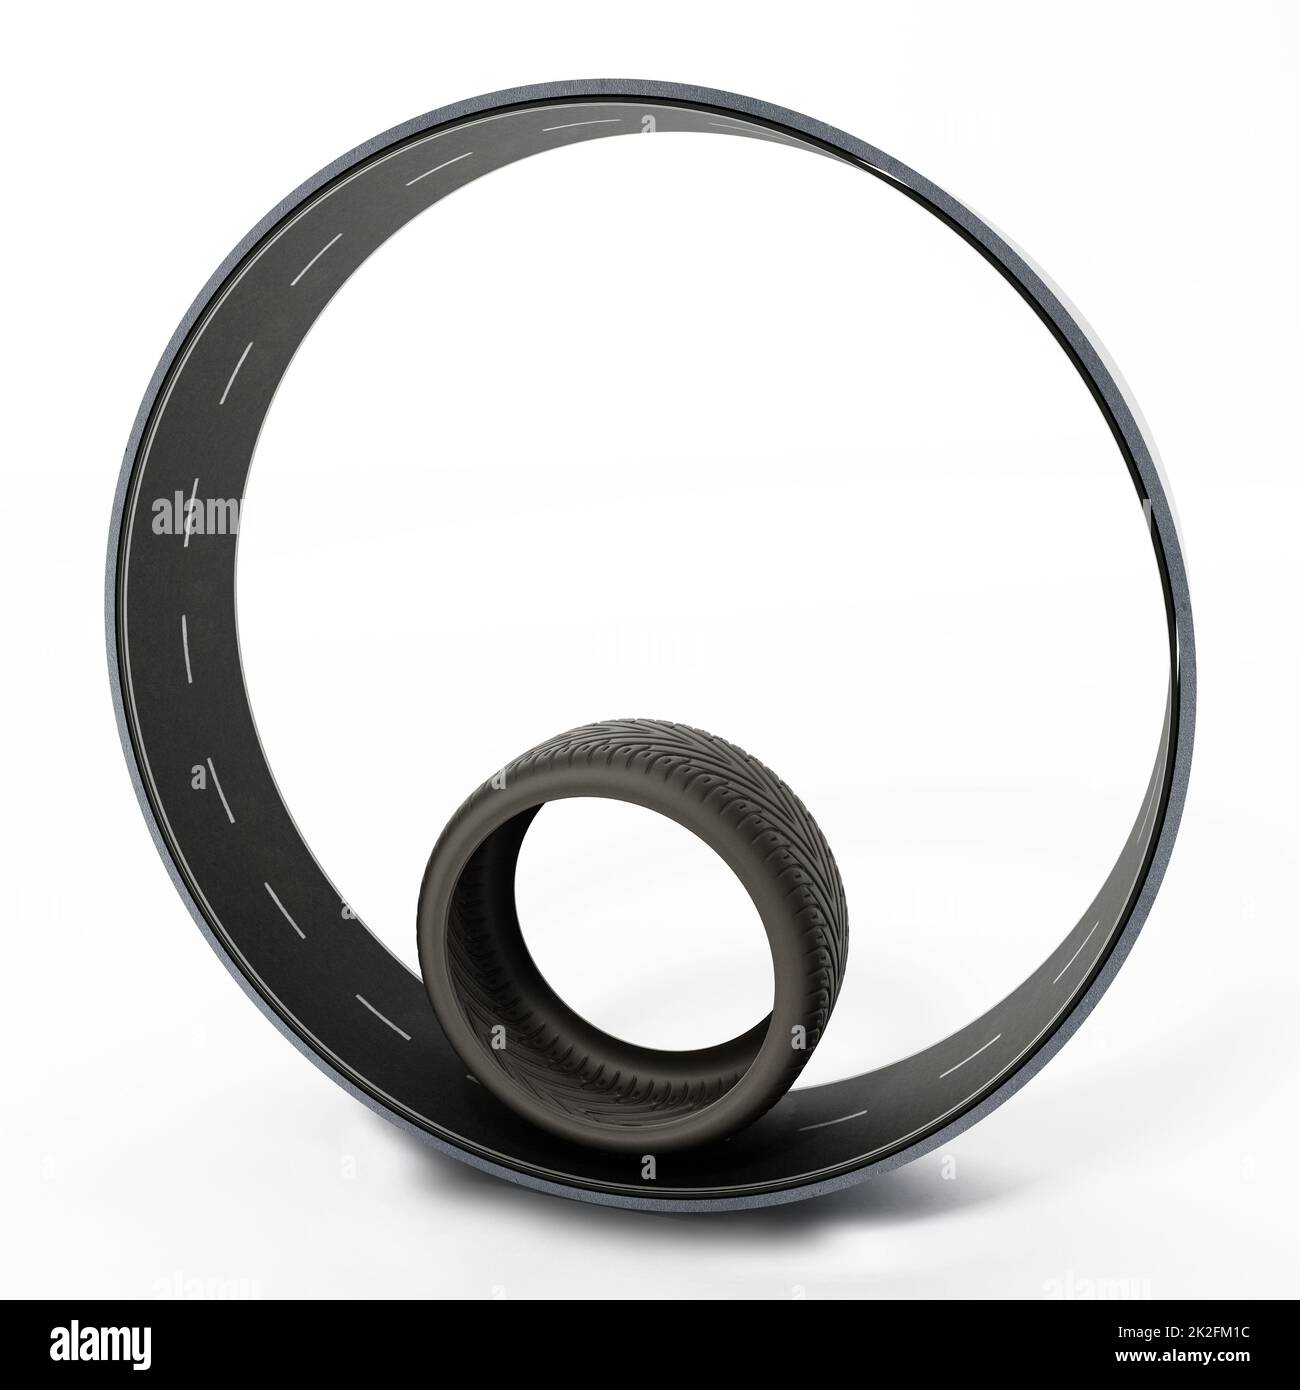 Spare new racing tyre inside circle shaped road. 3D illustration Stock Photo